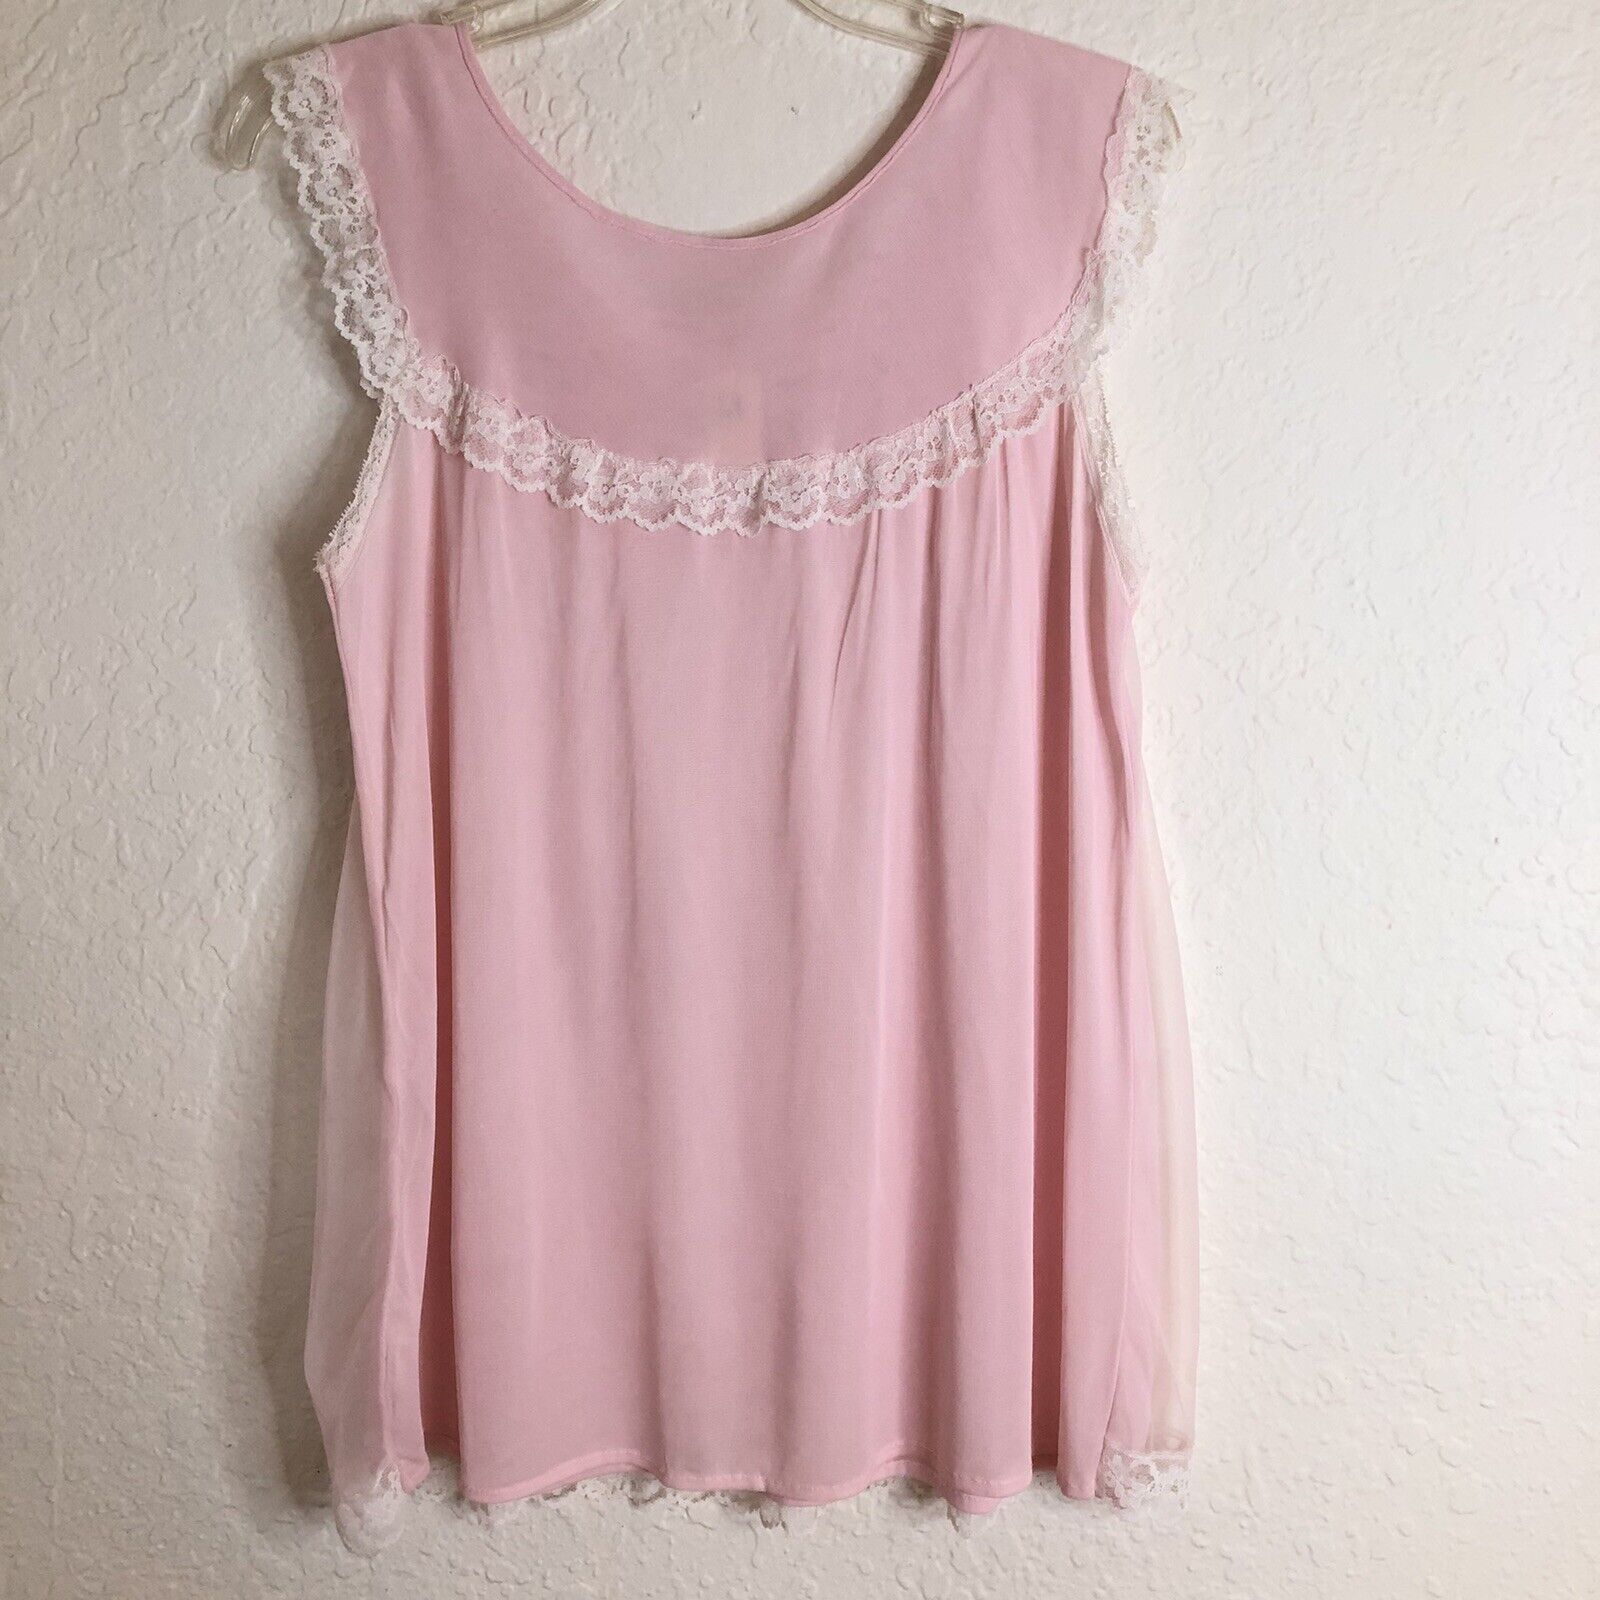 Vintage Babydoll Nightie Nightgown 1960s Size Med… - image 5